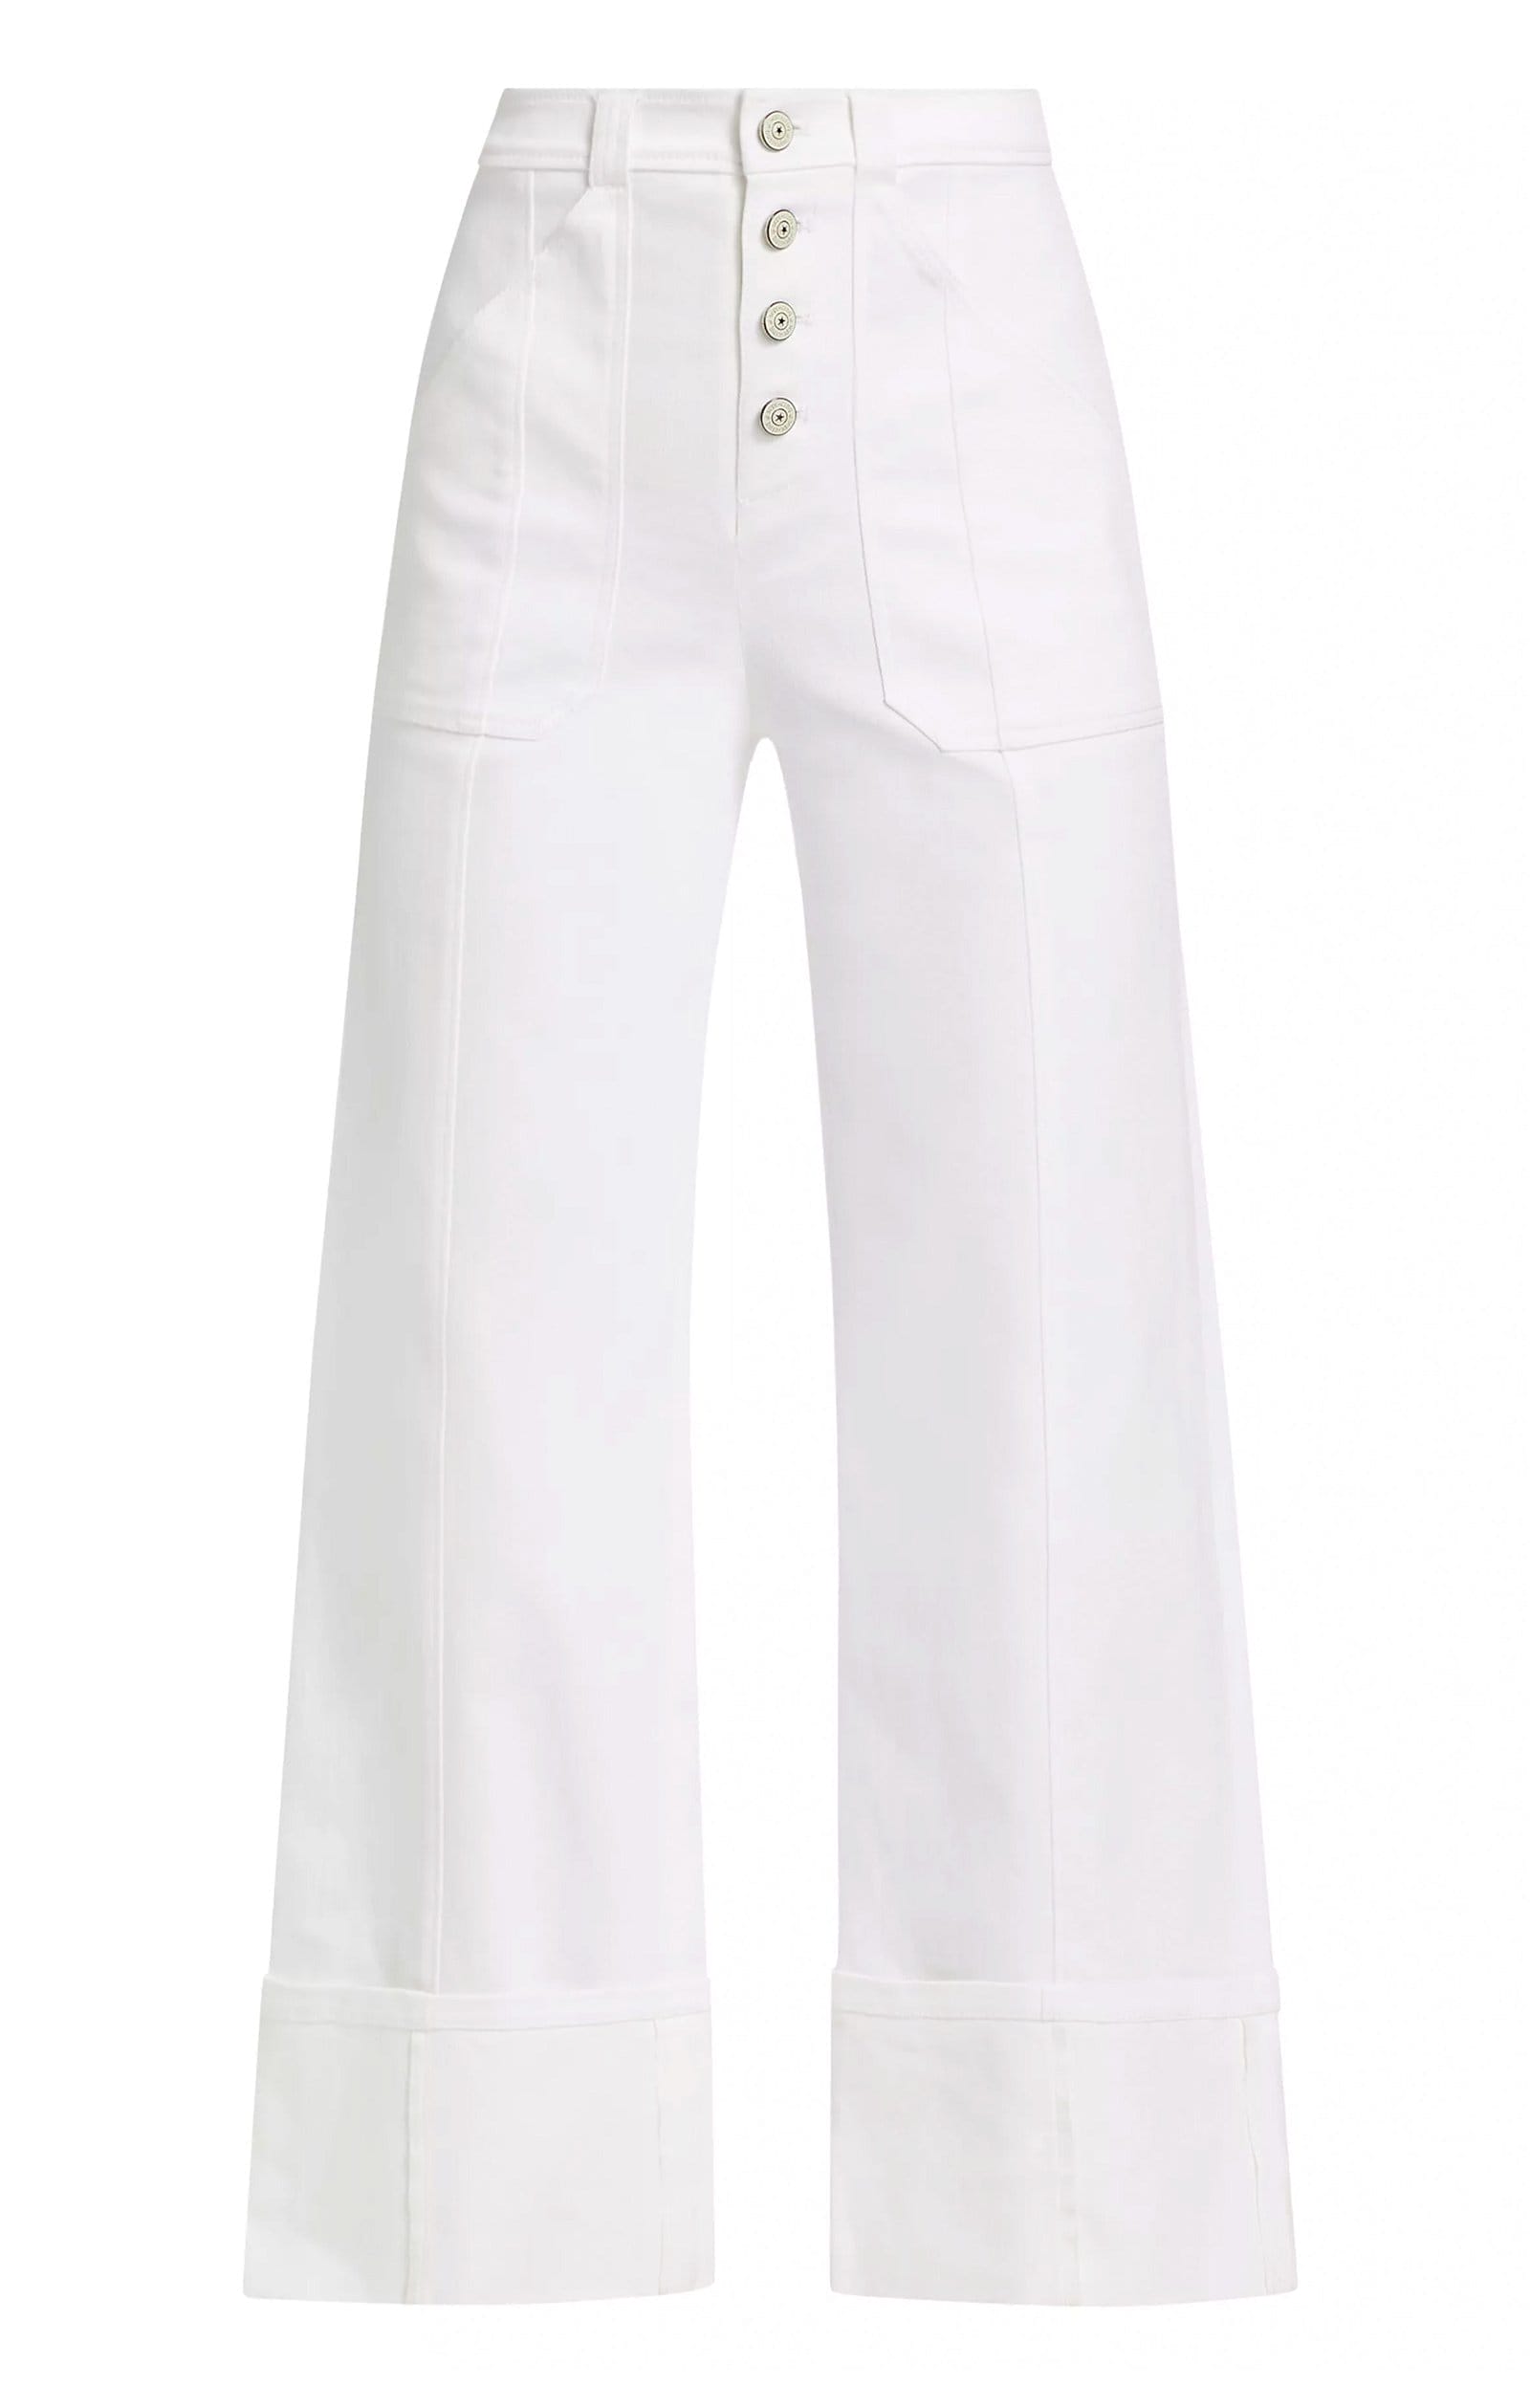 https://cinqasept.nyc/collections/le-denim/products/cuffed-benji-pant-in-white